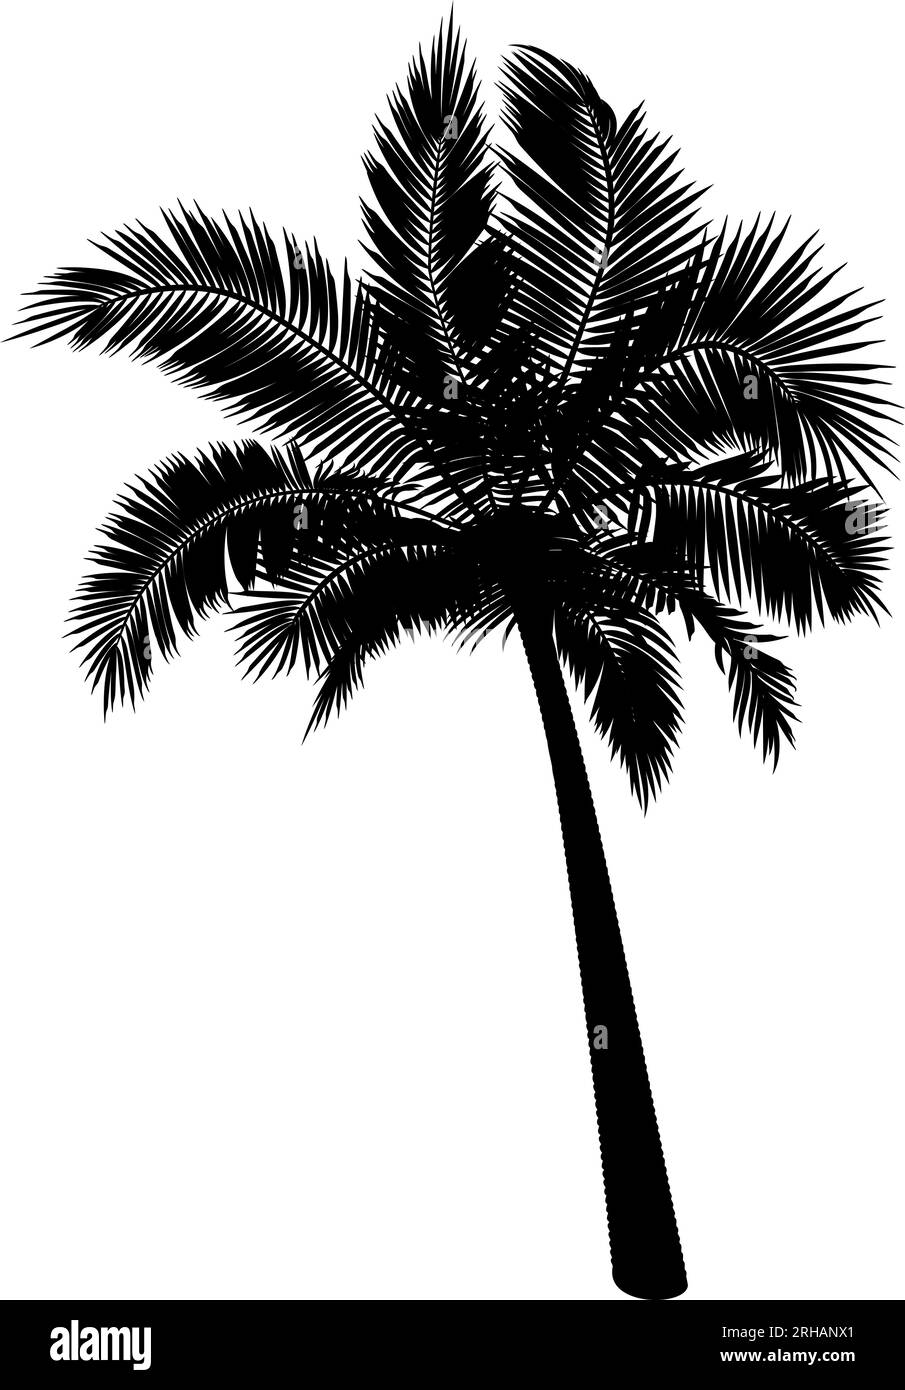 Shape of straight coconut palm tree. Vector illustration of palm tree trunk, foliage, branches, leaves. Image of tropical tree in vector. Stock Vector